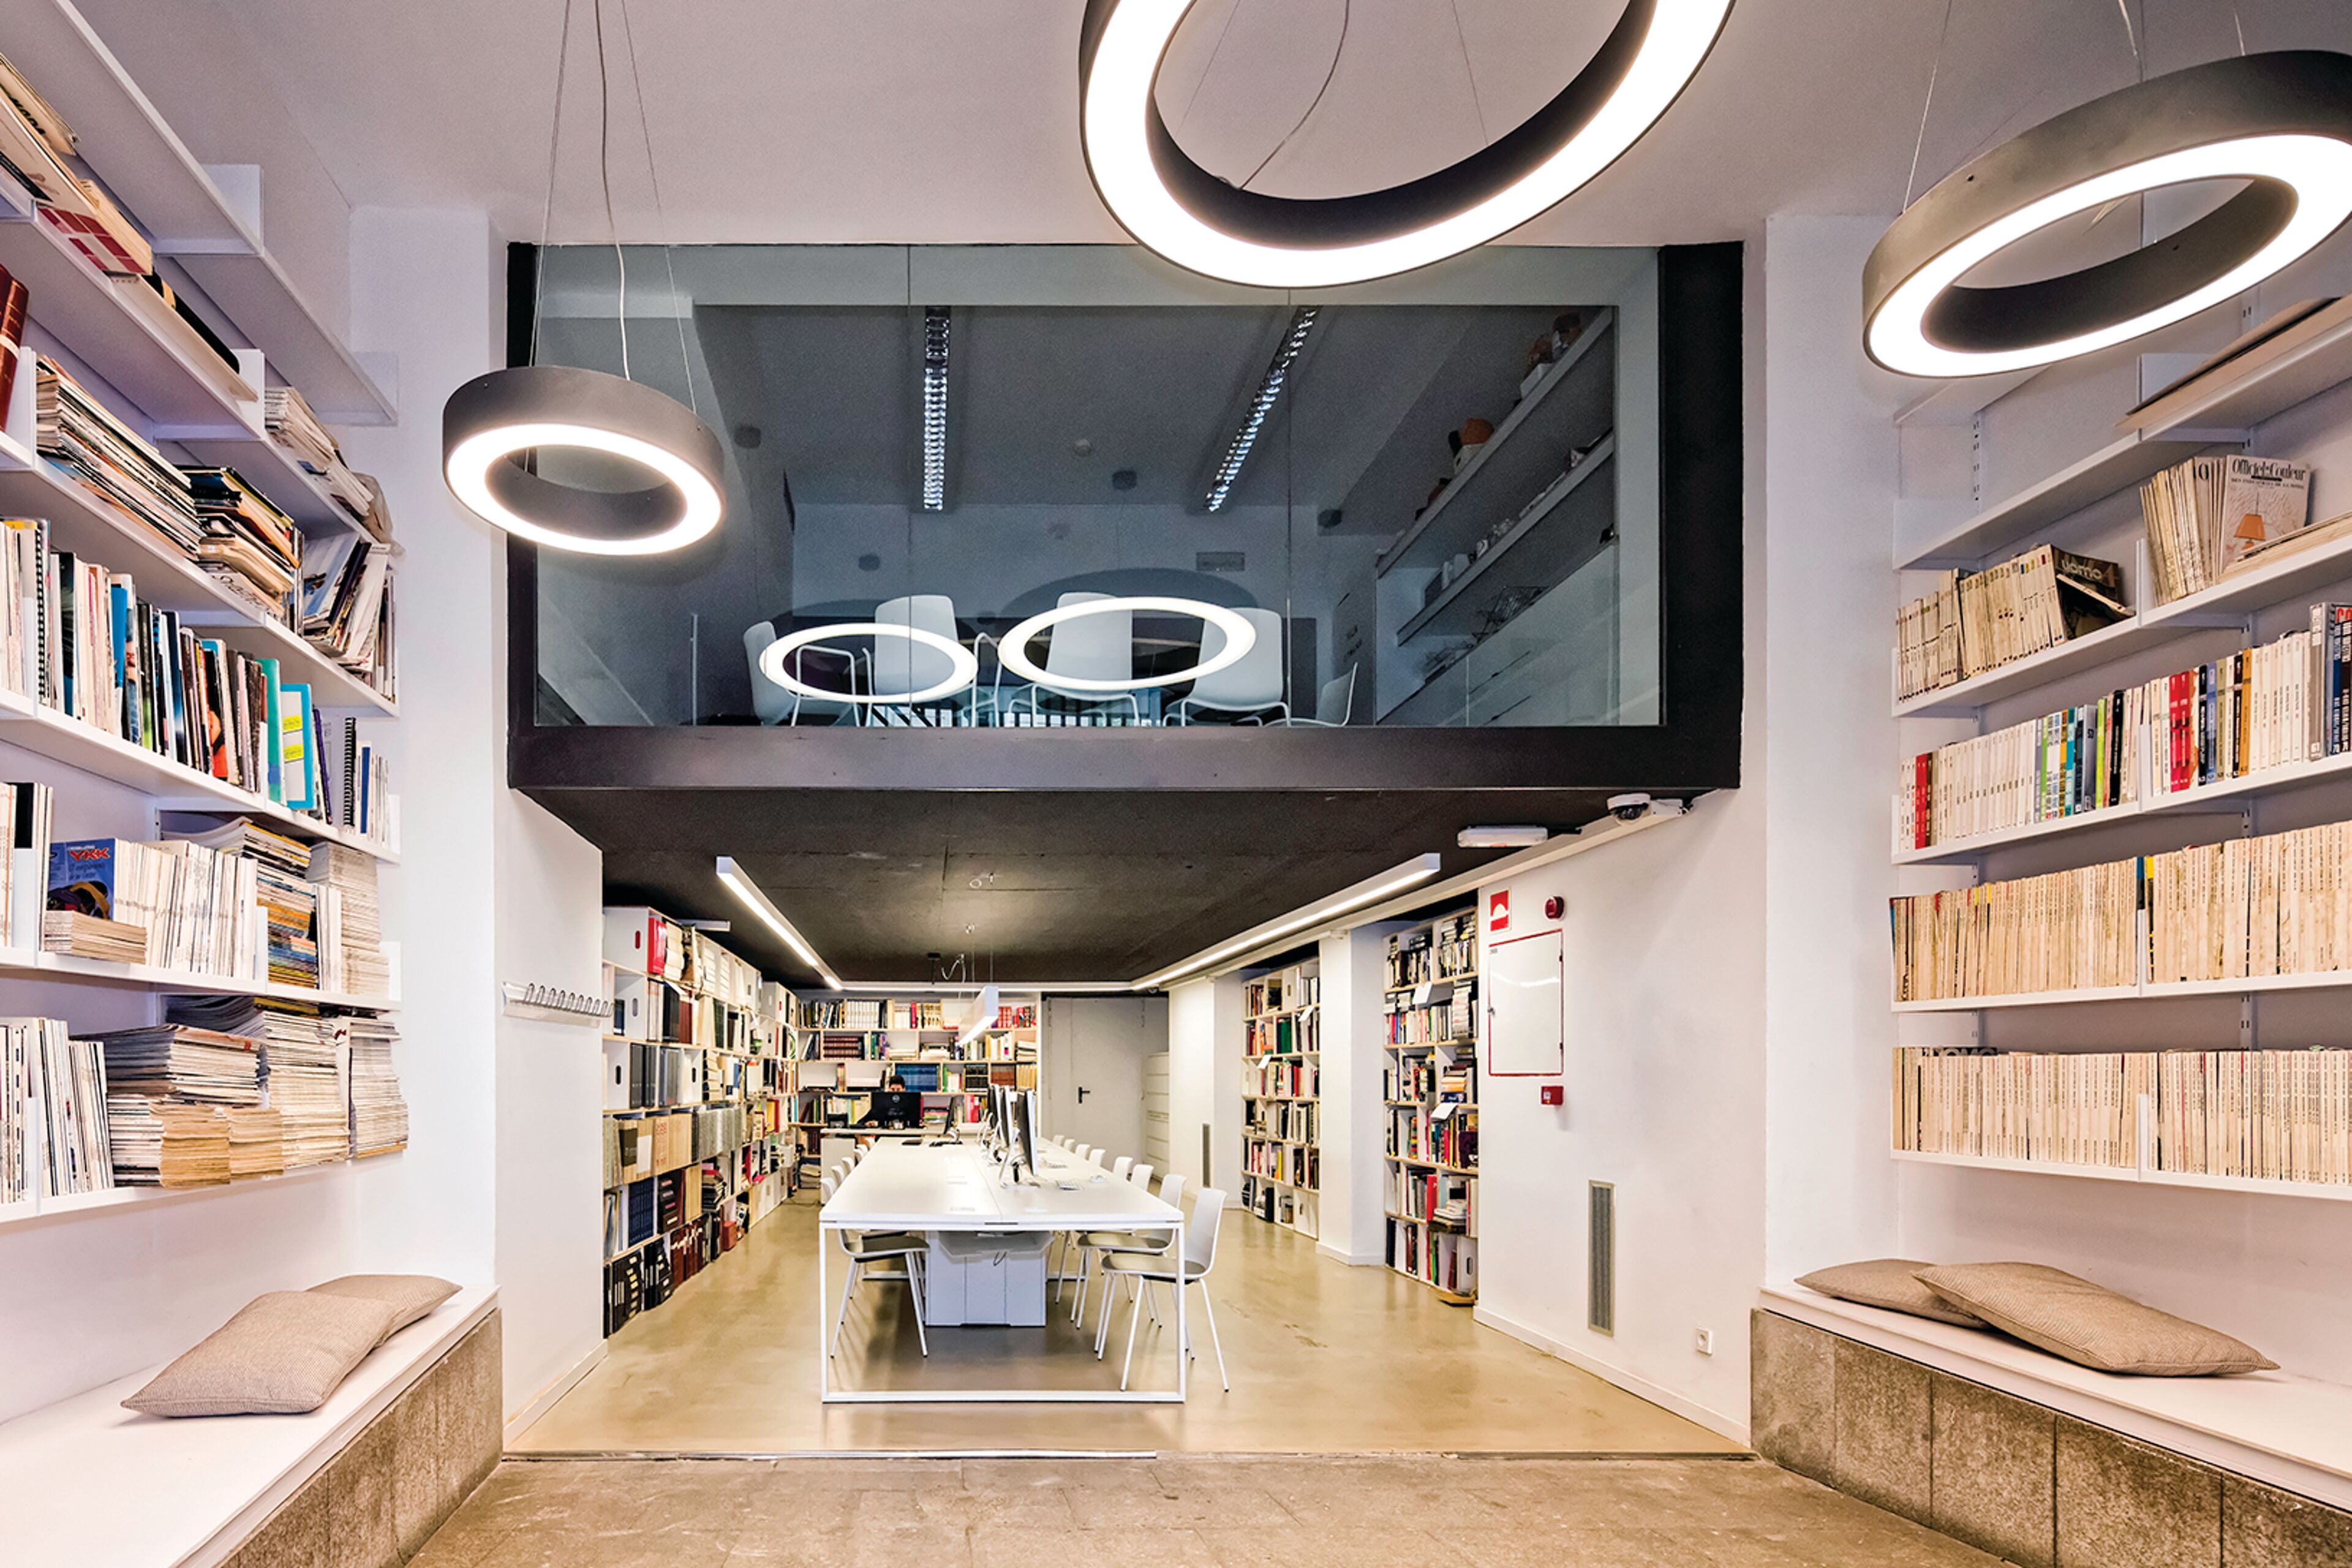 A sleek library space with book-lined walls and contemporary hanging lights, featuring a cozy reading area with a reflective ceiling for an open feel.